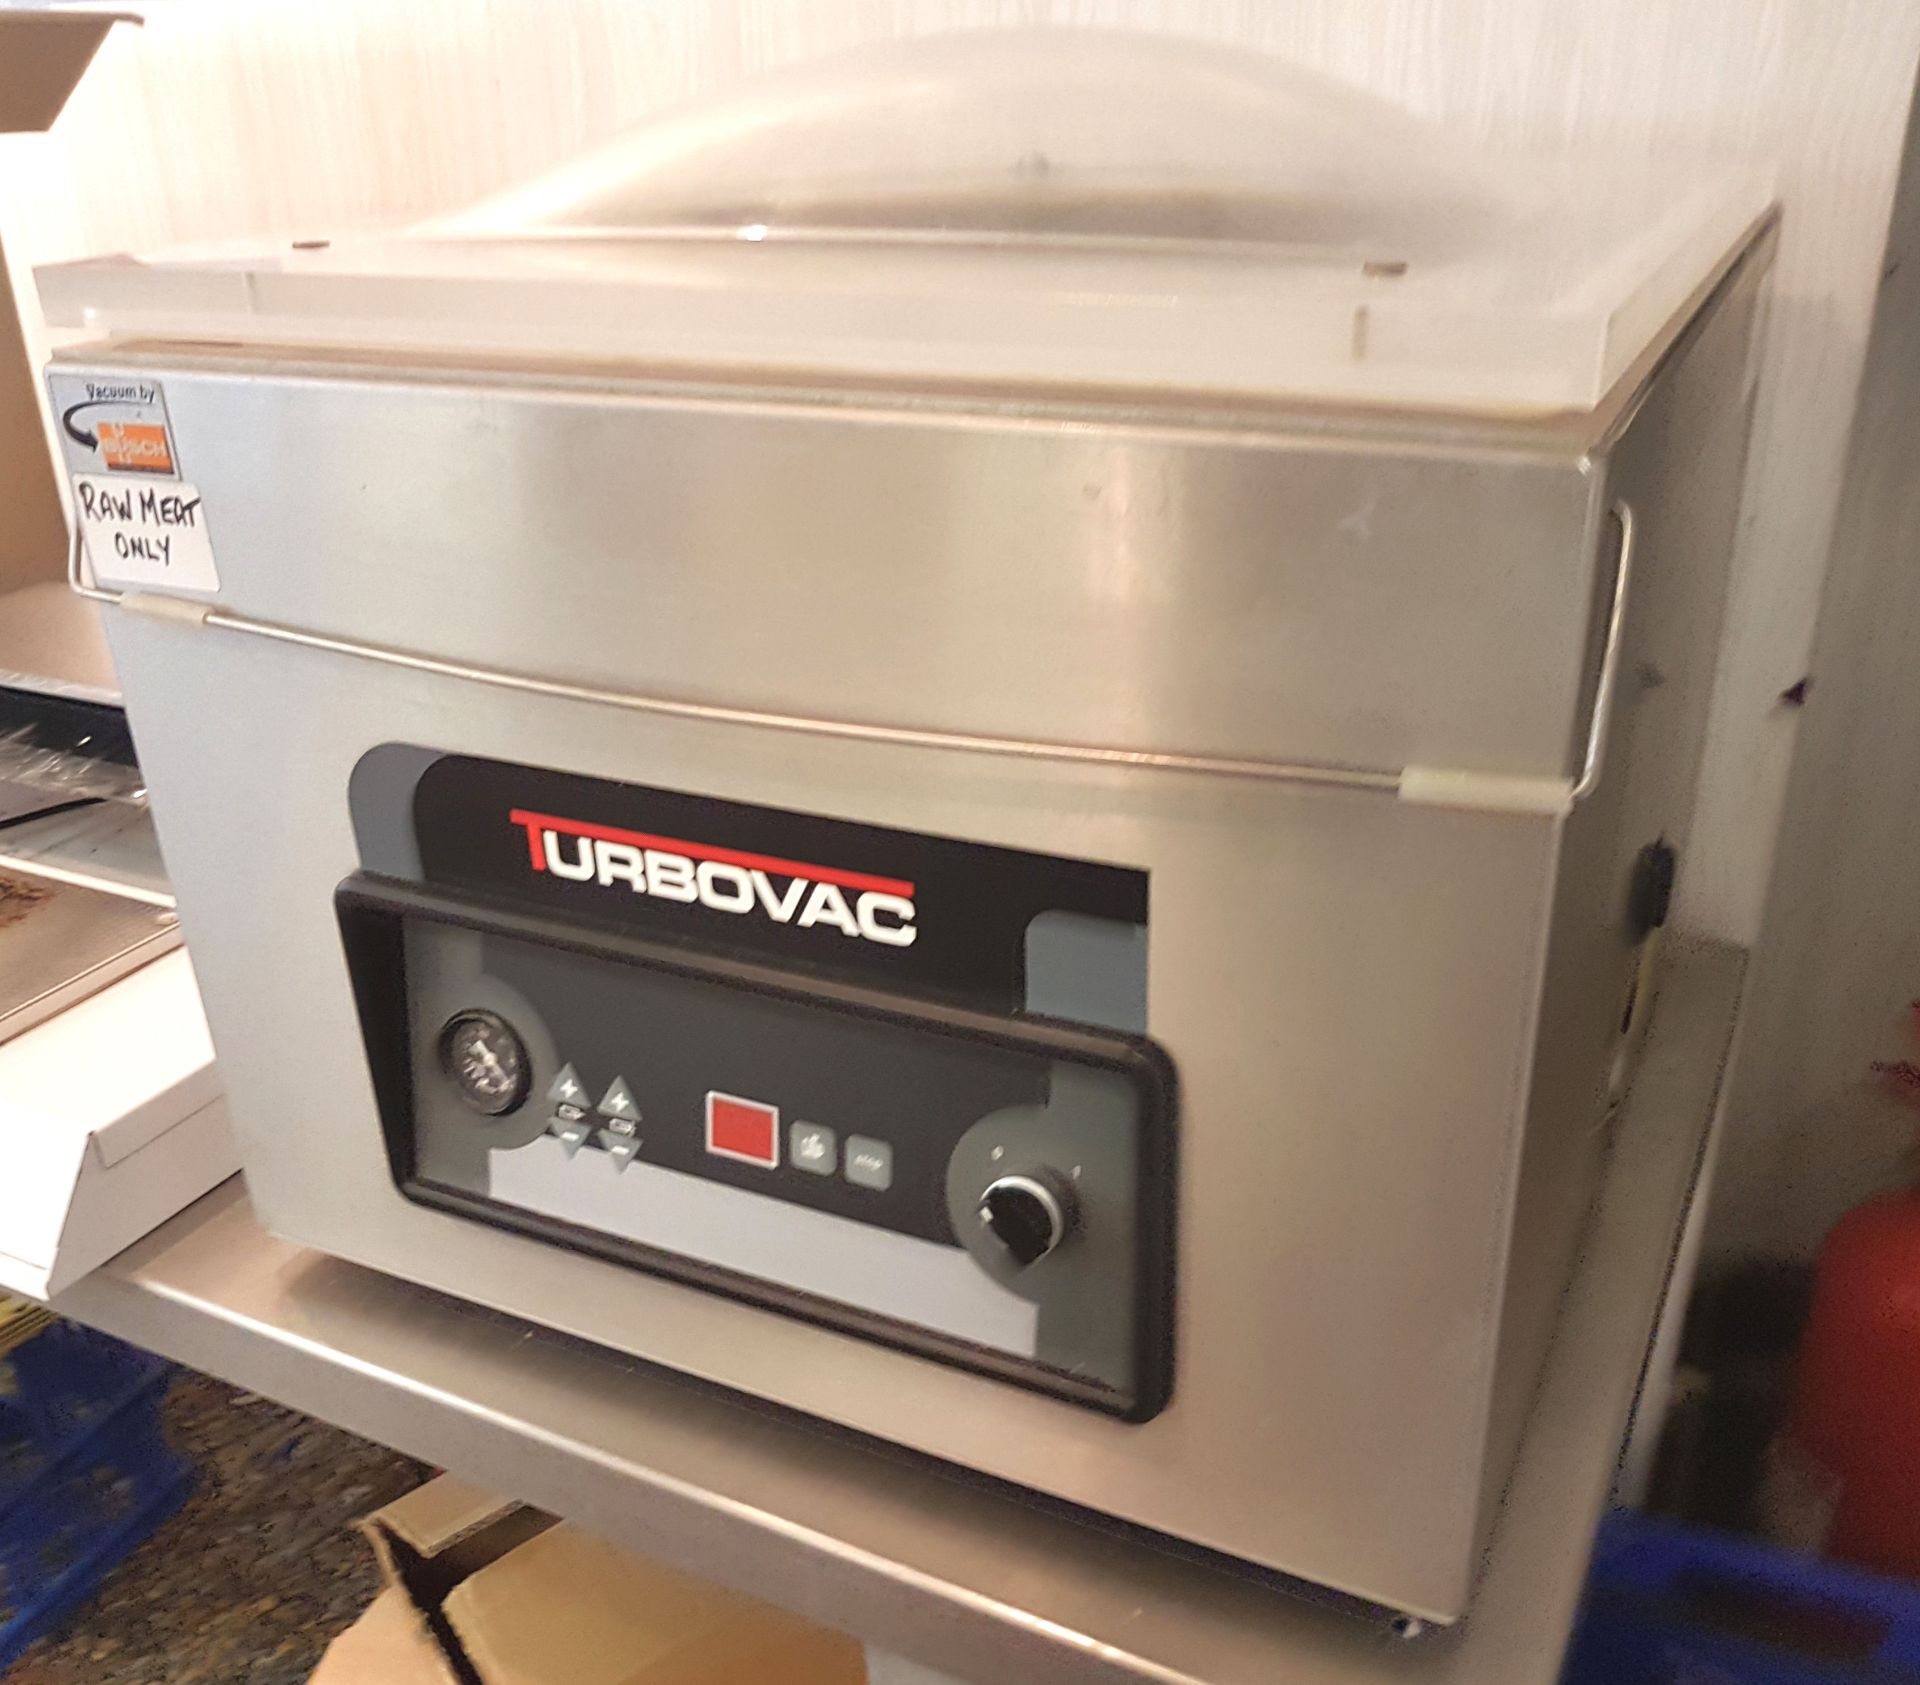 1 x Turbovac 440 ST Vacuum Packer In Stainless Steel - Dimensions: 52 x 55 x 15cm - Ref: SIN021 - - Image 3 of 4